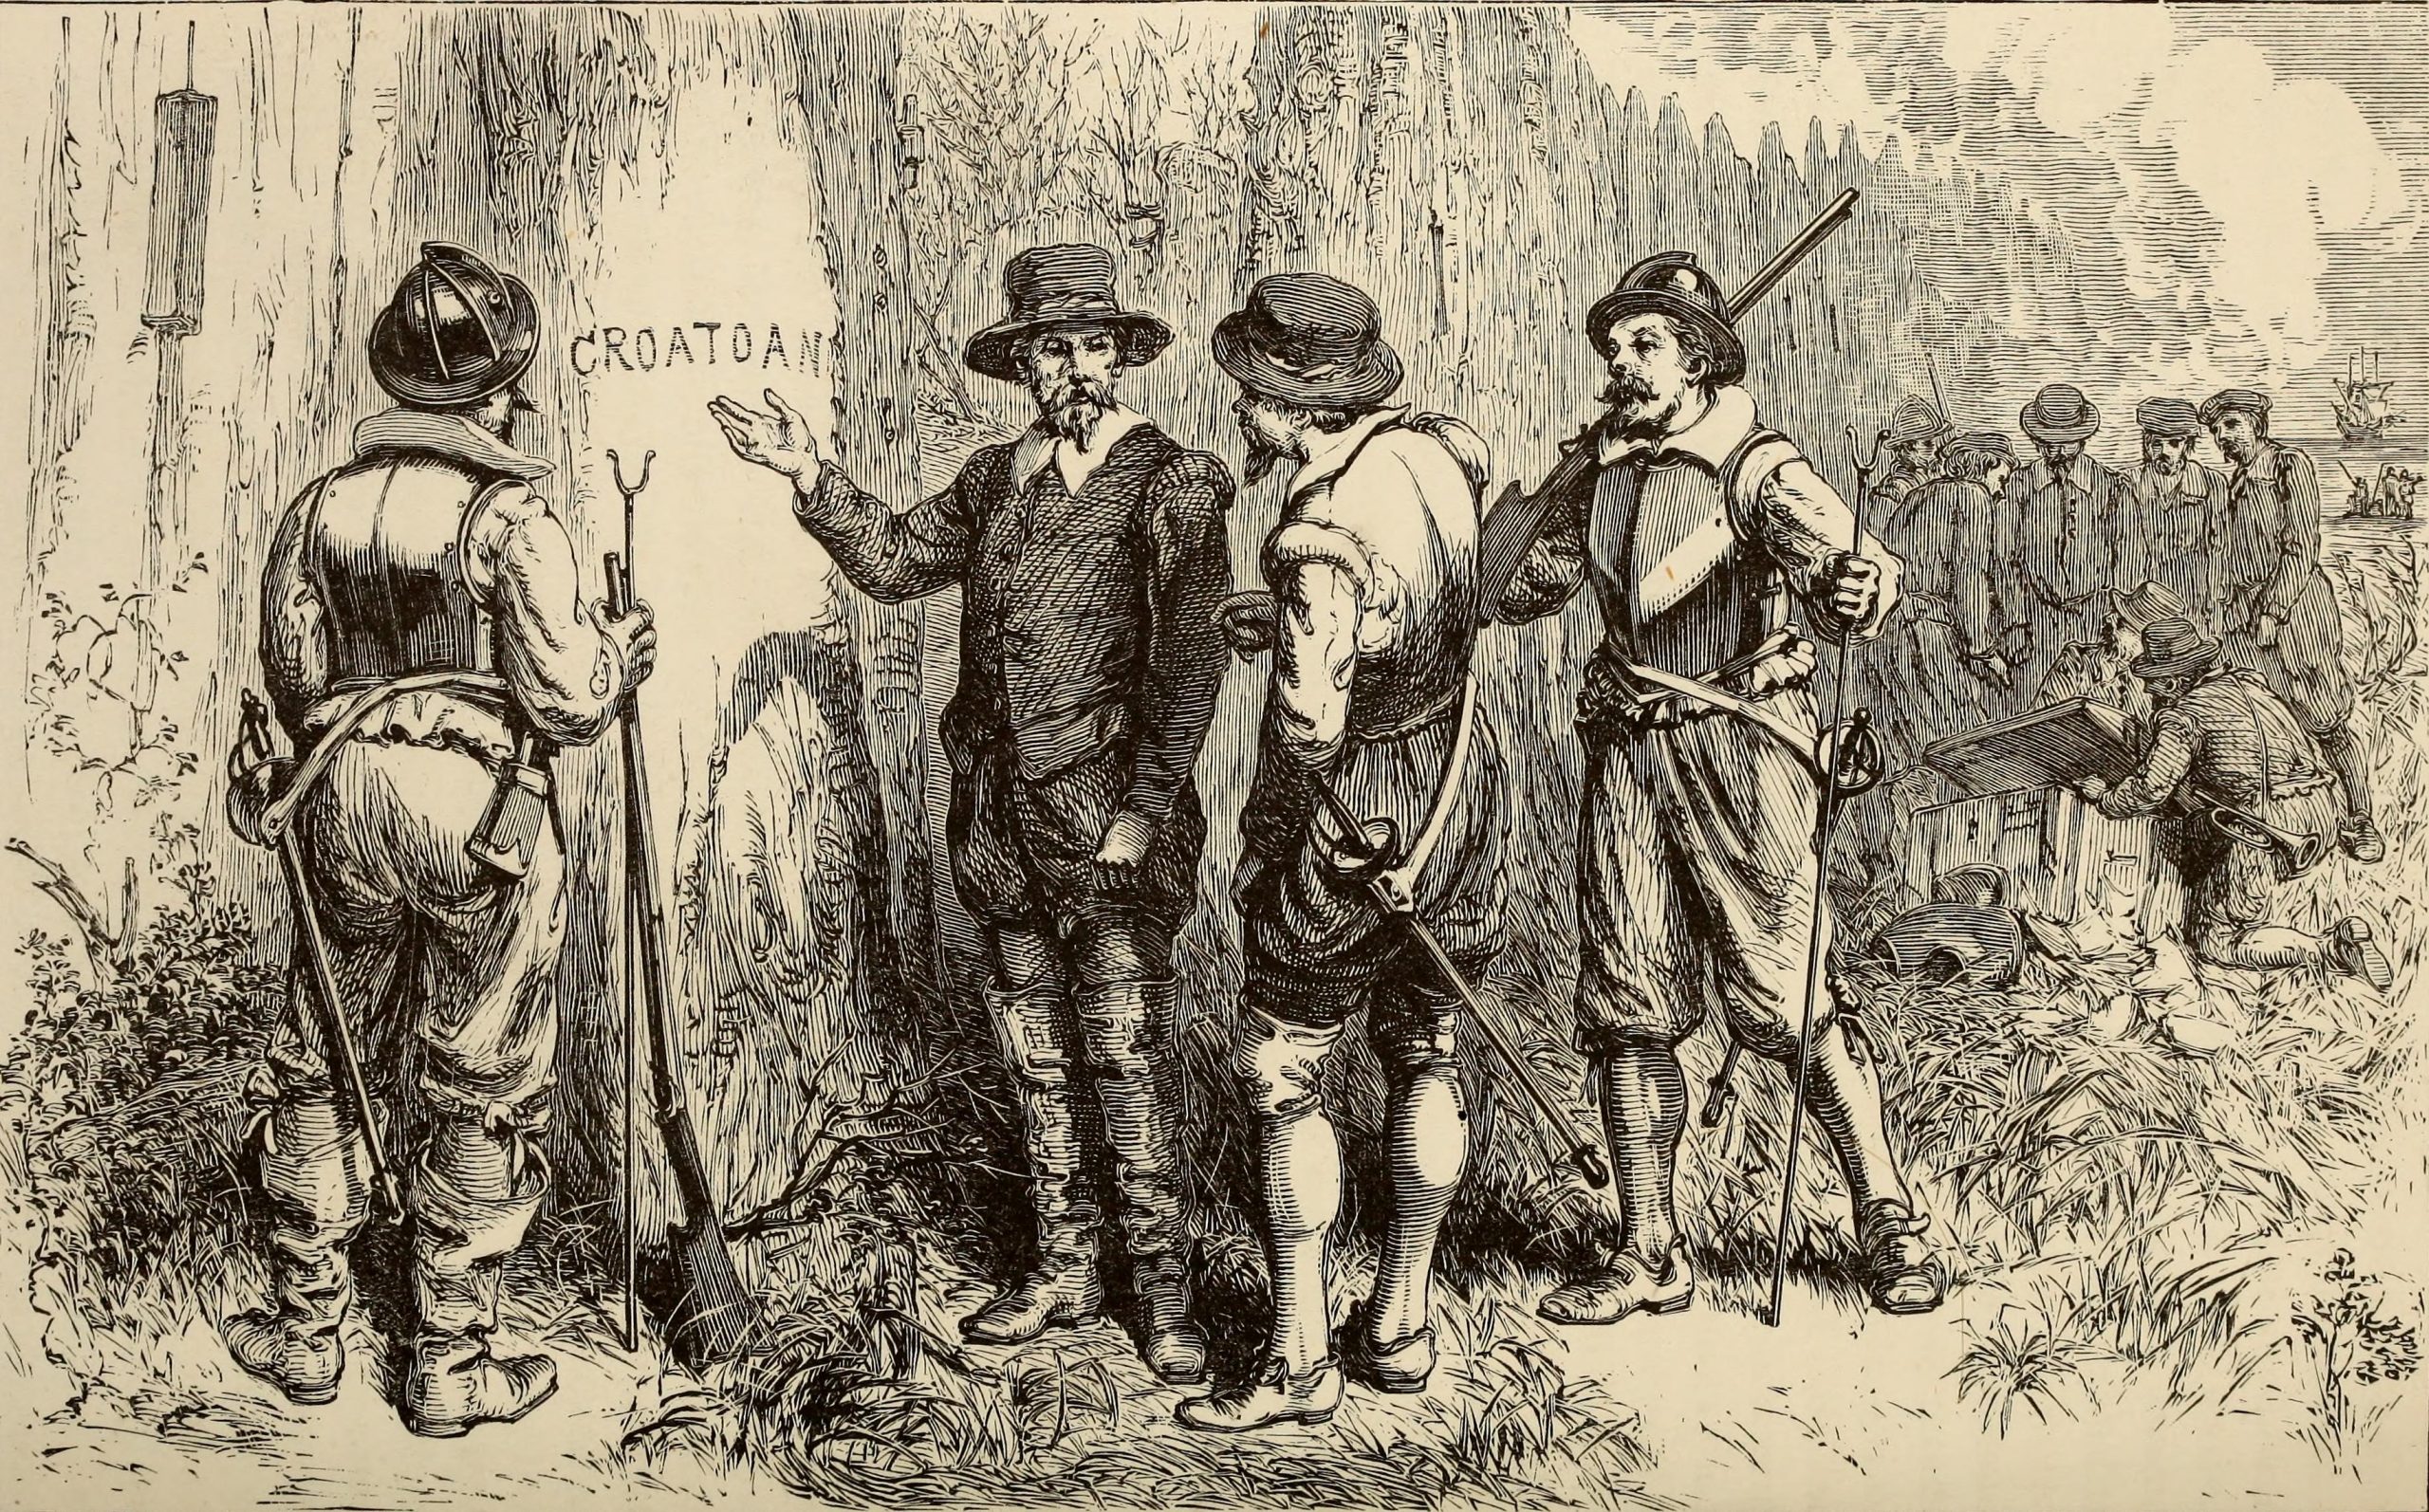 Four English colonists standing around a tree with "Croatoan" carved into it. One is gesturing to the carving, while the other three cluster around him. More colonists and a ship can be seen in the background.